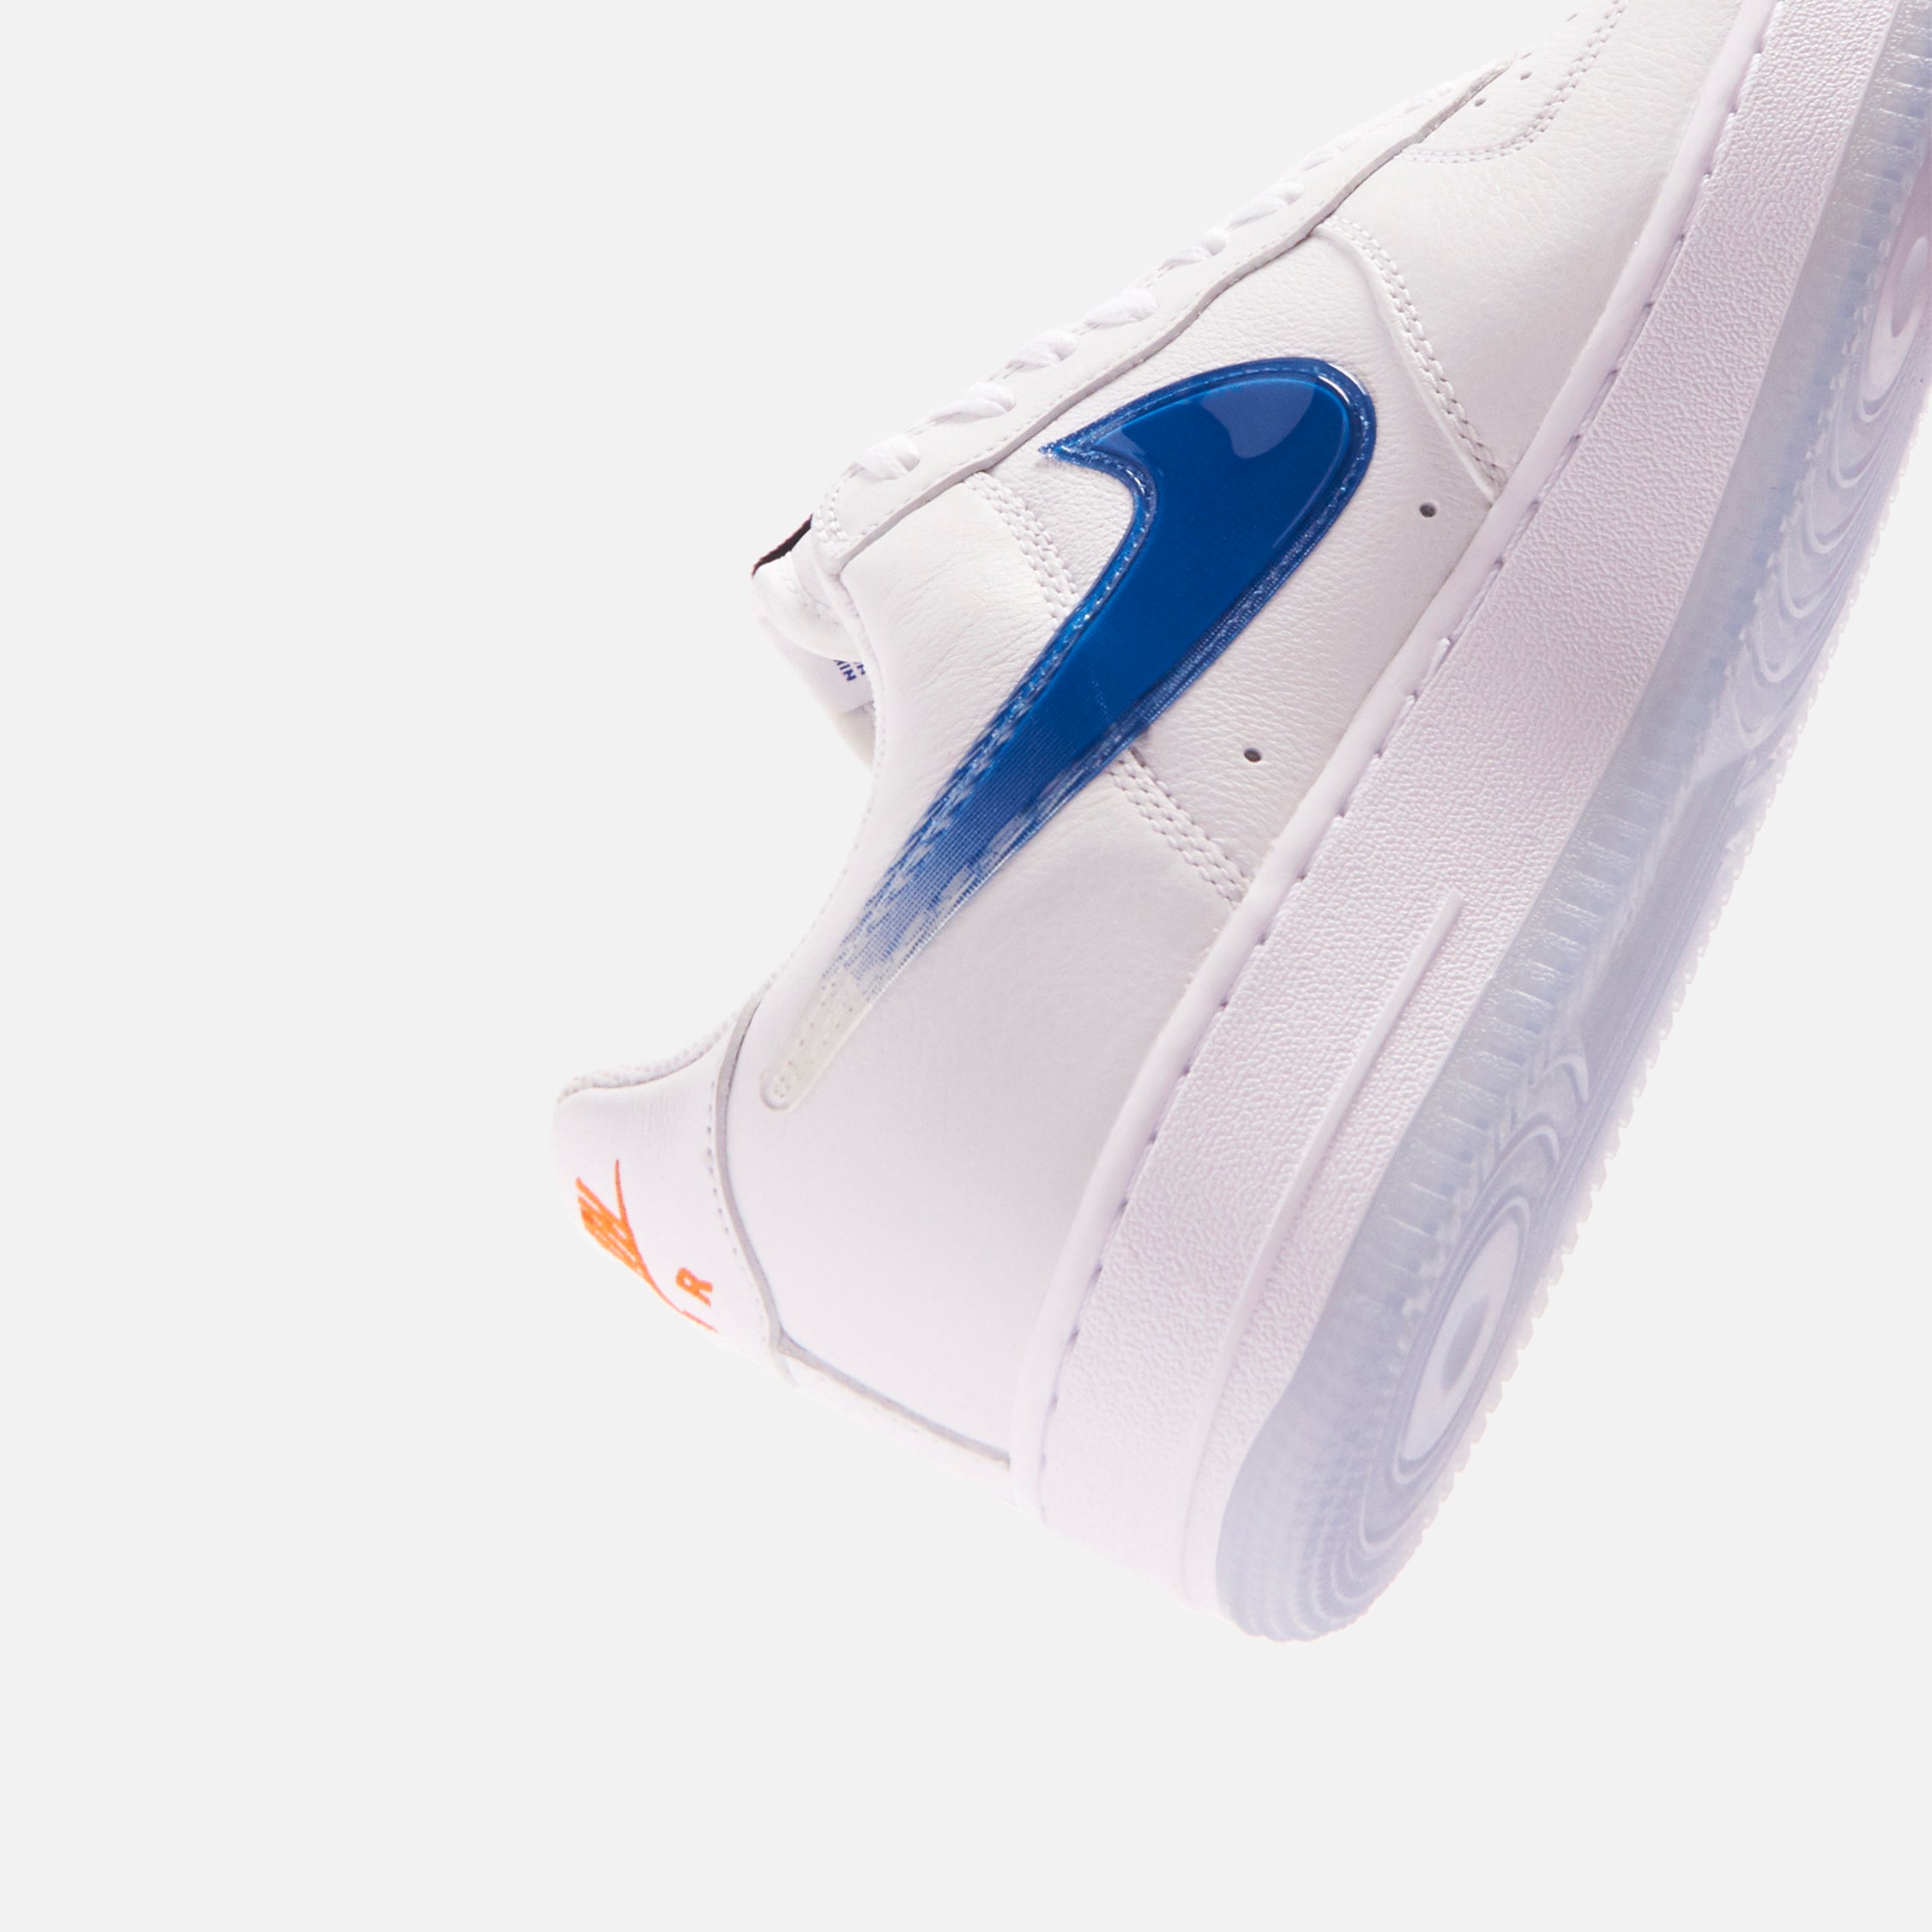 More Images of the Kith x Nike Air Force 1 Low NYC Have Surfaced - KLEKT  Blog